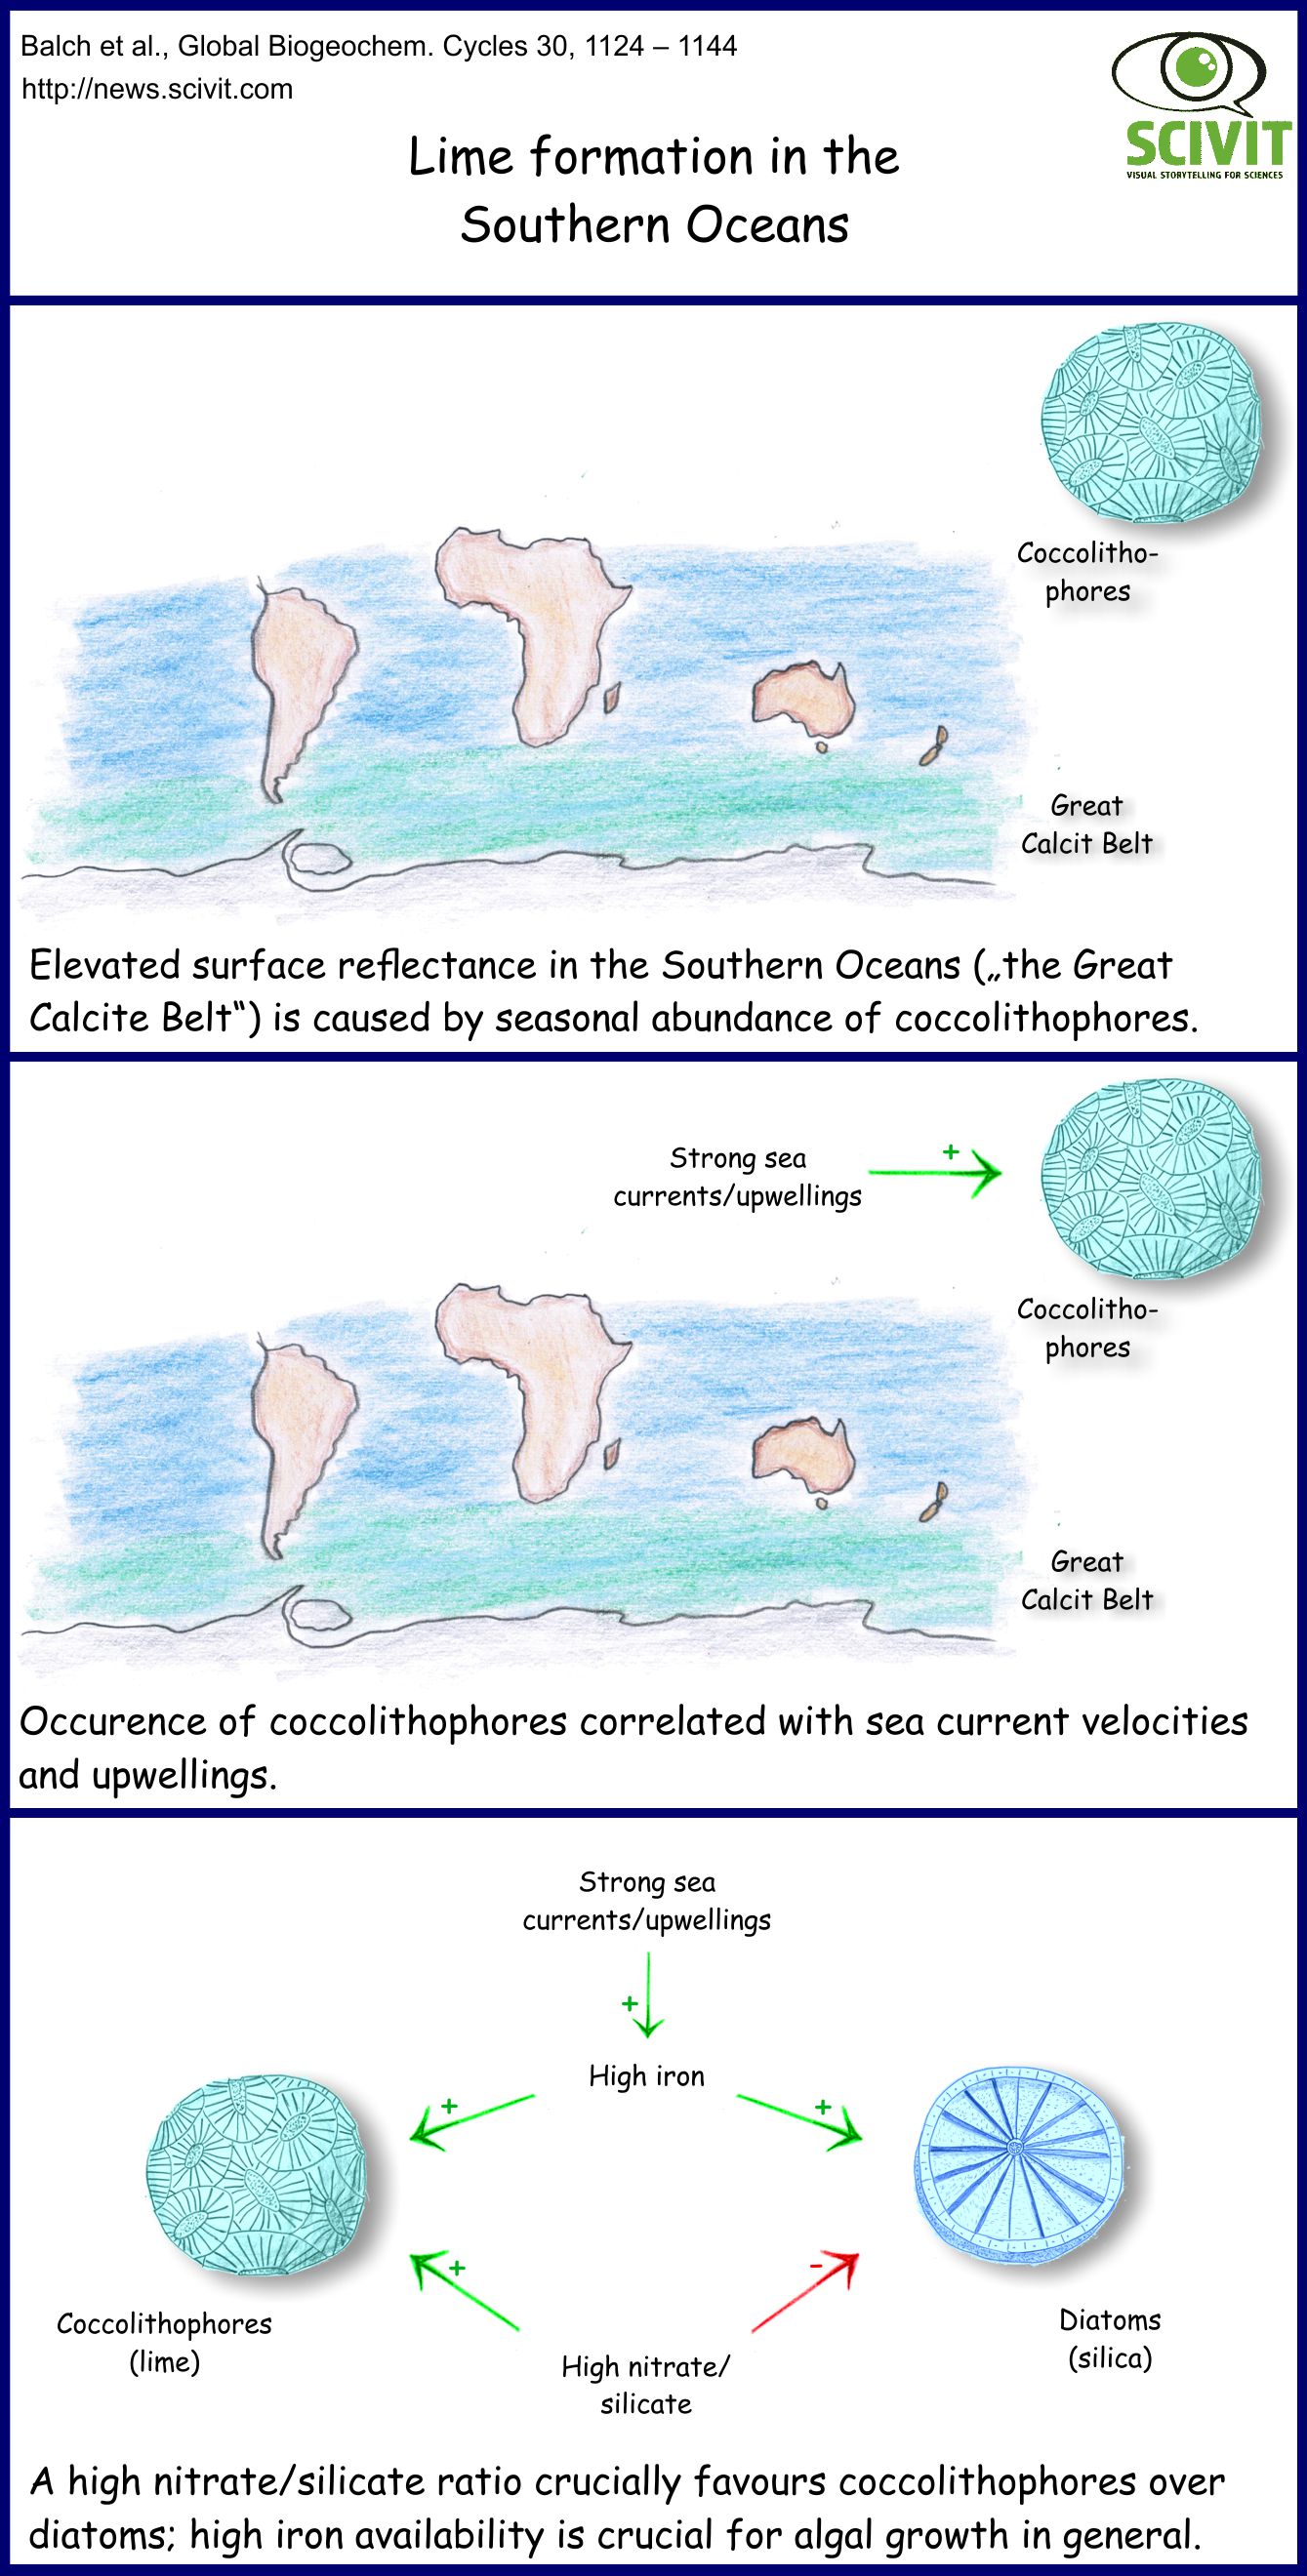 Lime formation in the Southern Oceans